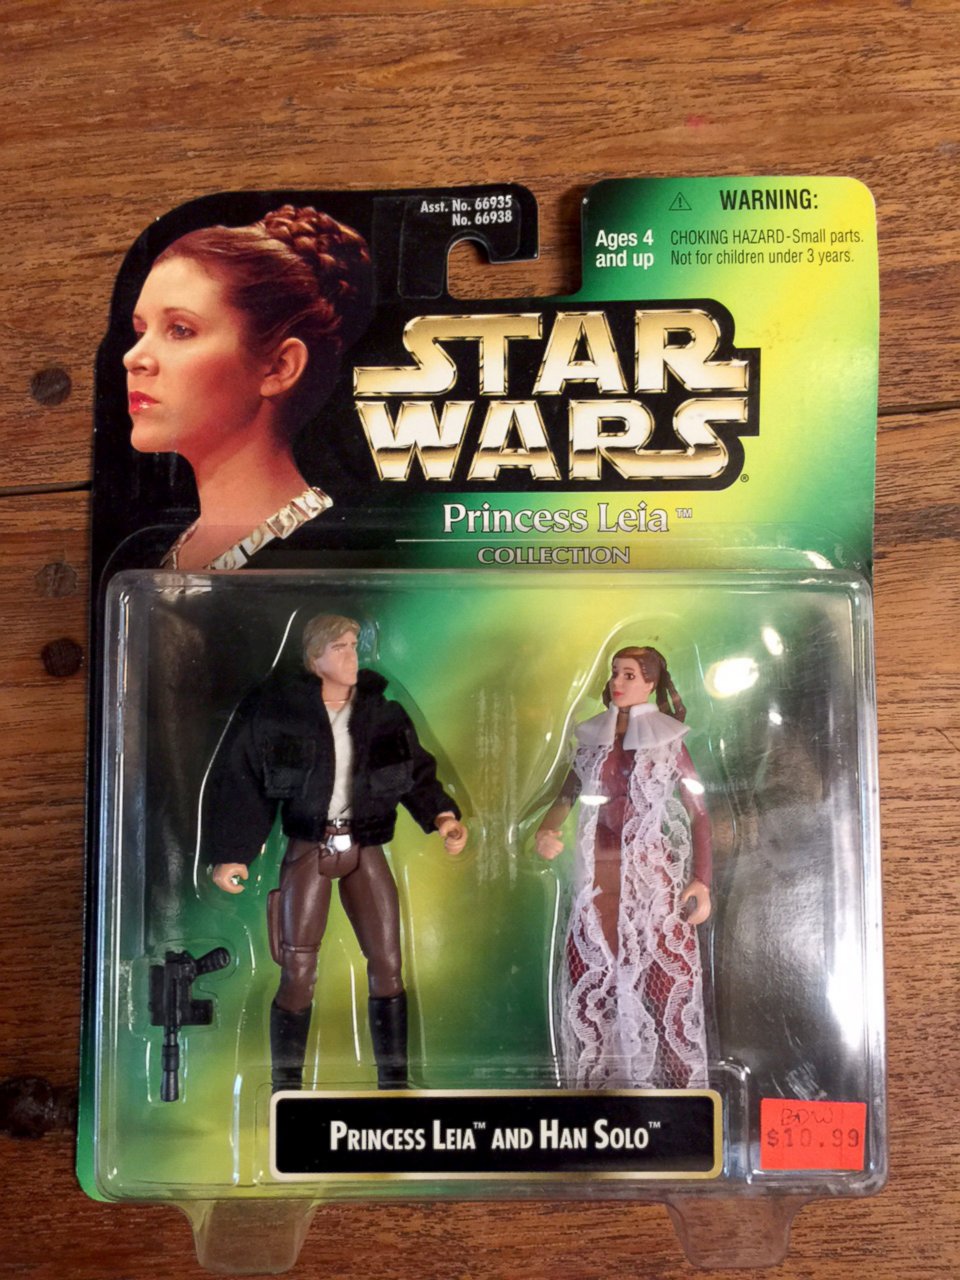 PHOTO: Princess Leia and Han Solo action figure in its original packaging.